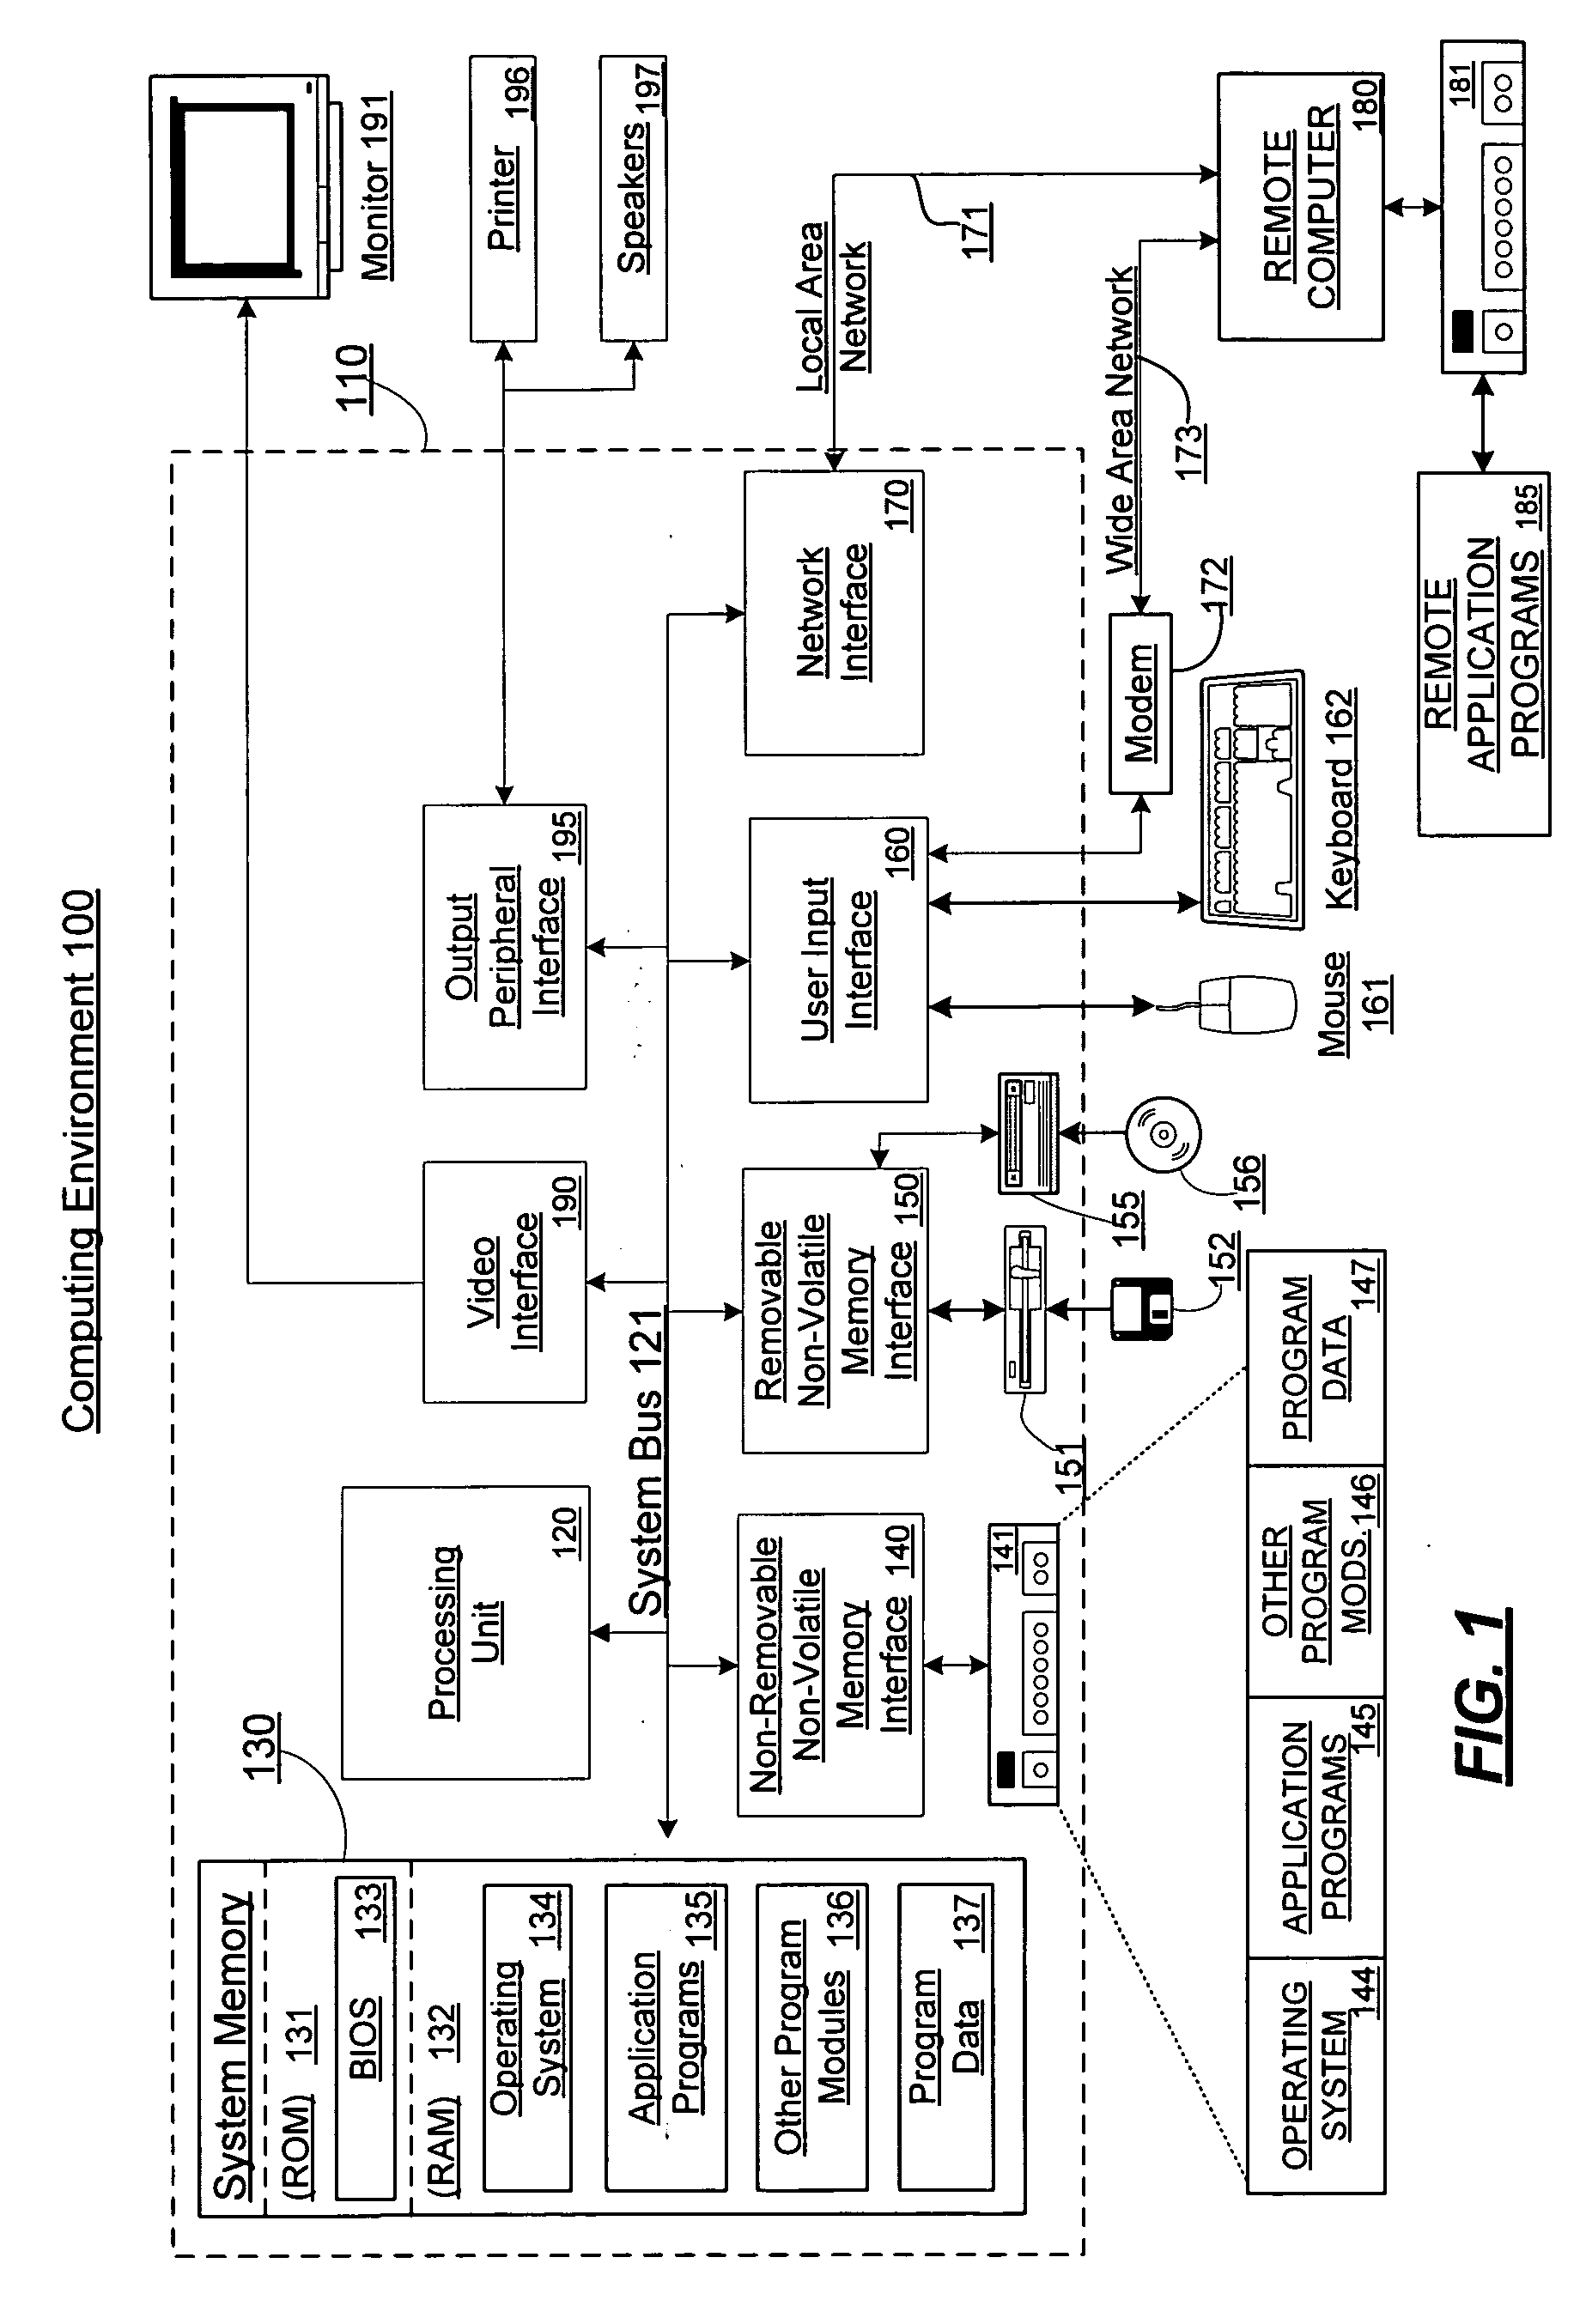 Portion-level in-memory module authentication